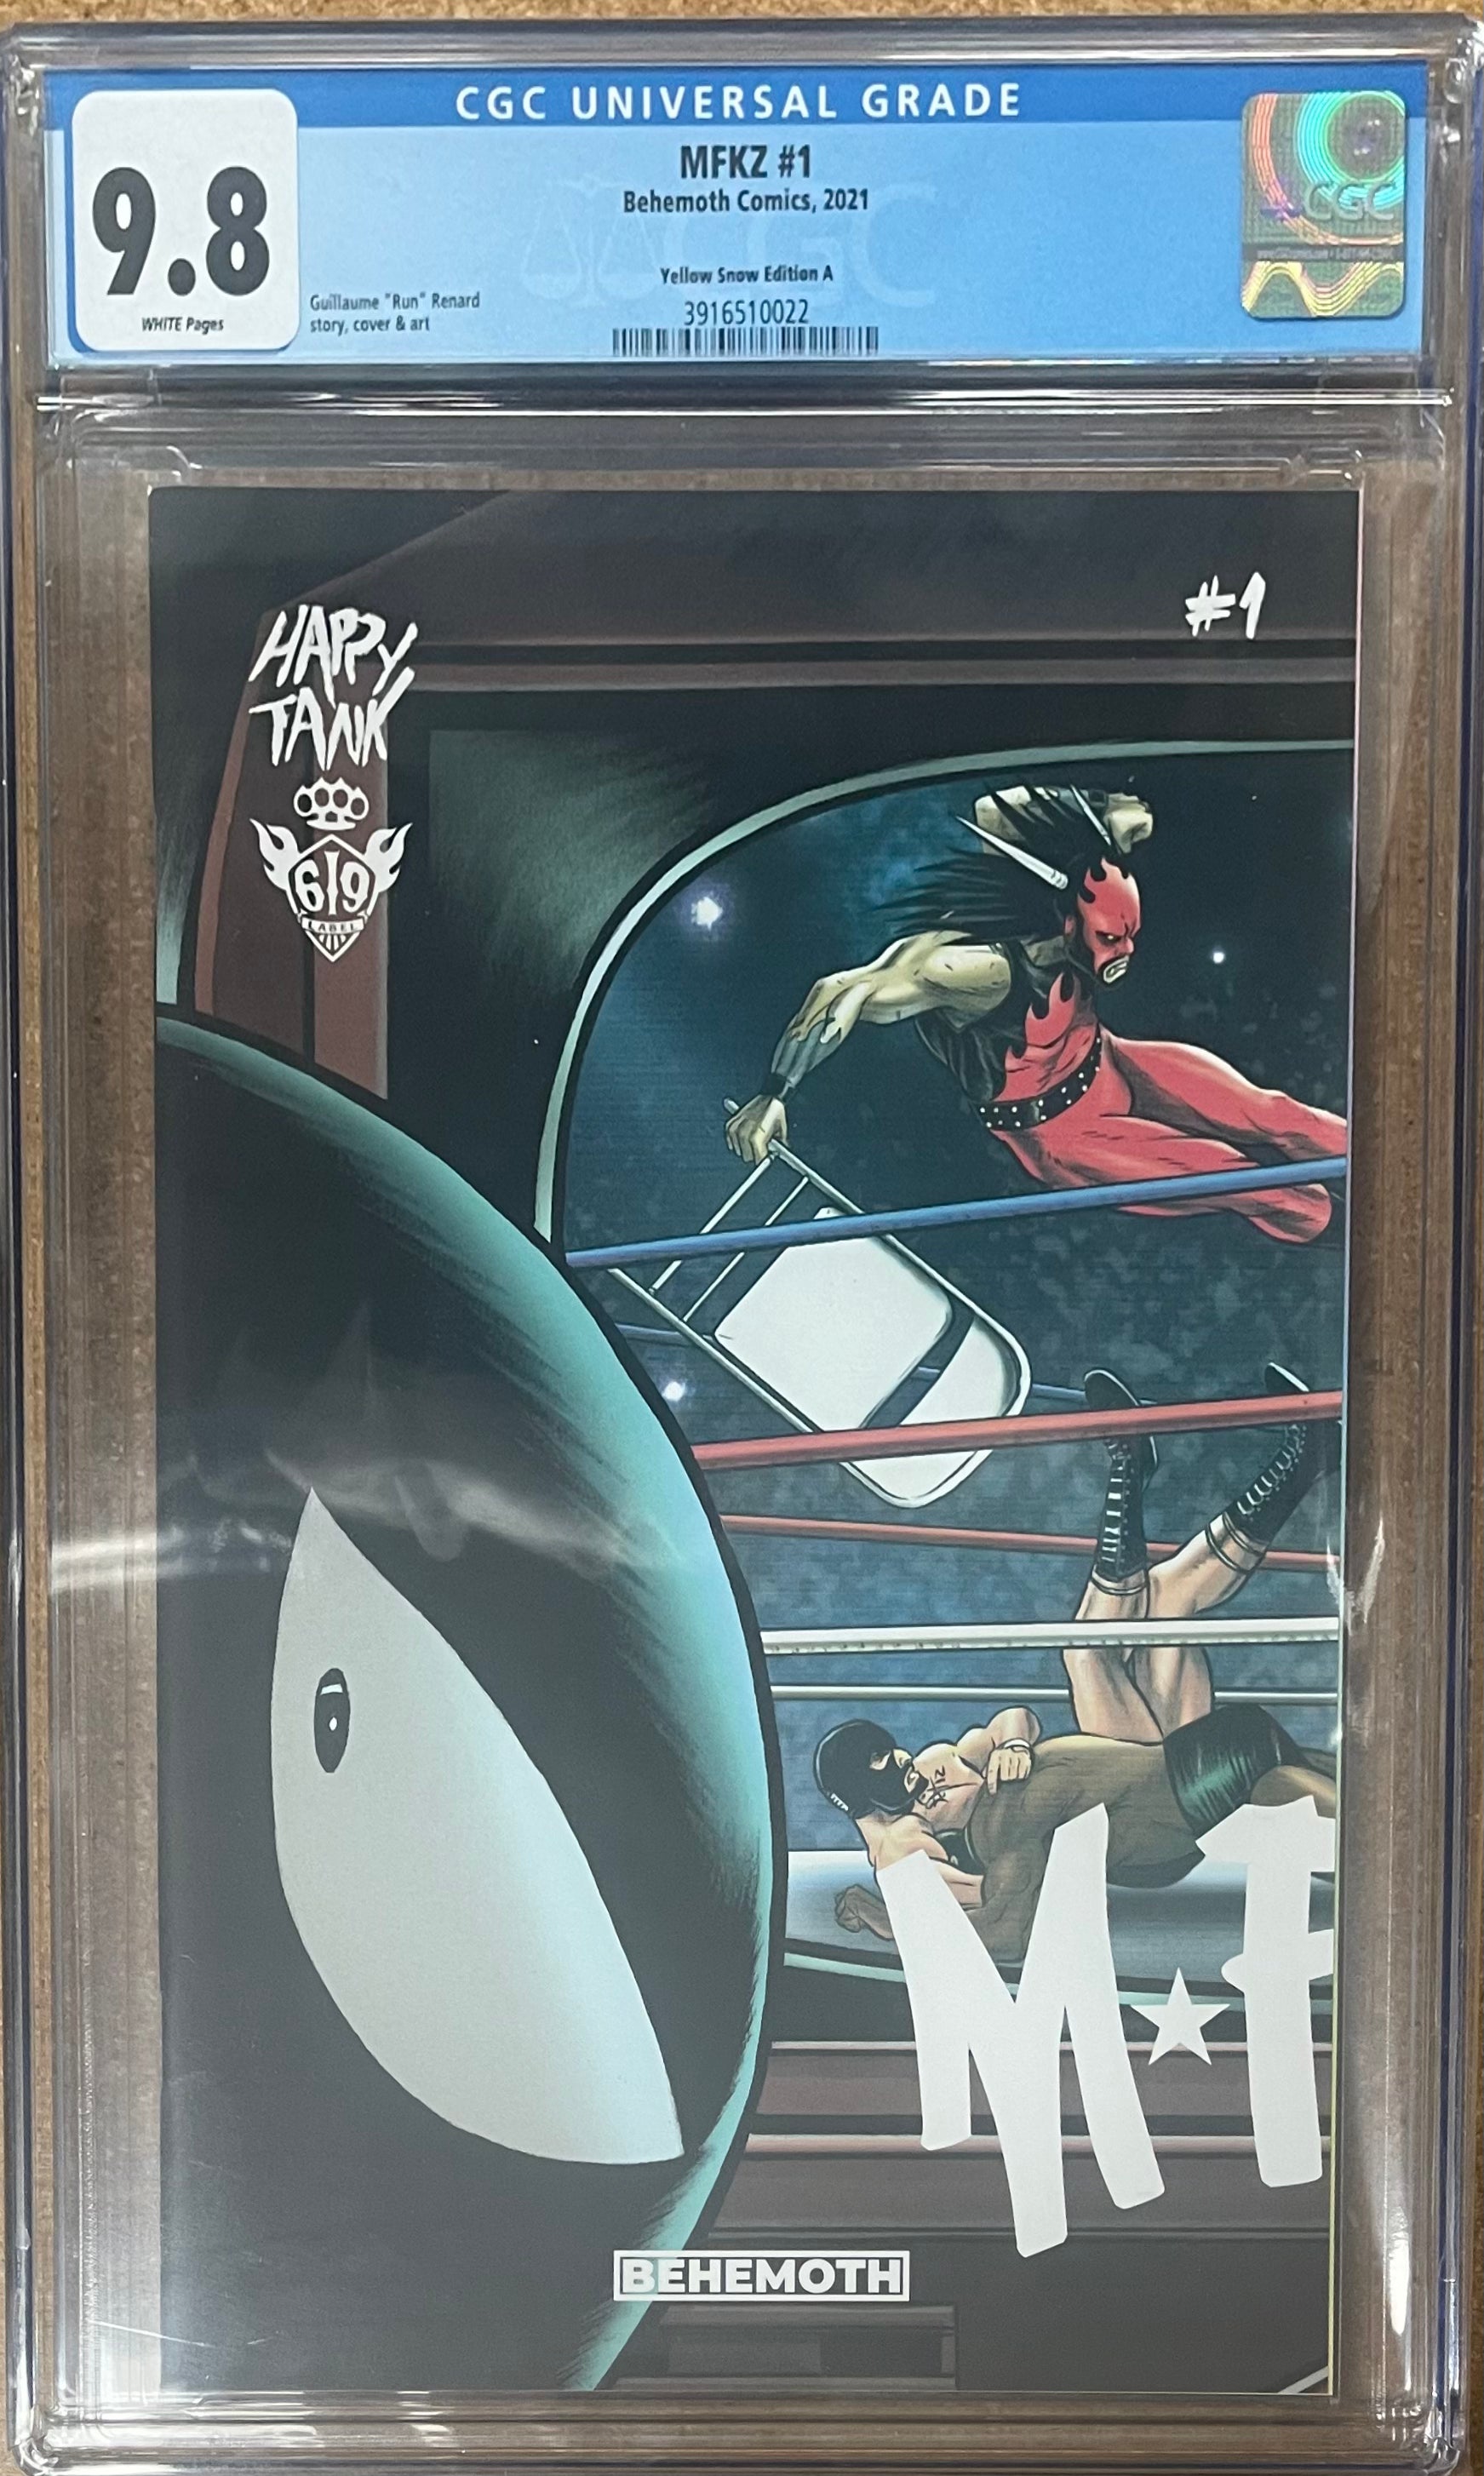 MFKZ #1 MIKE ROOTH VARIANT A CGC 9.8